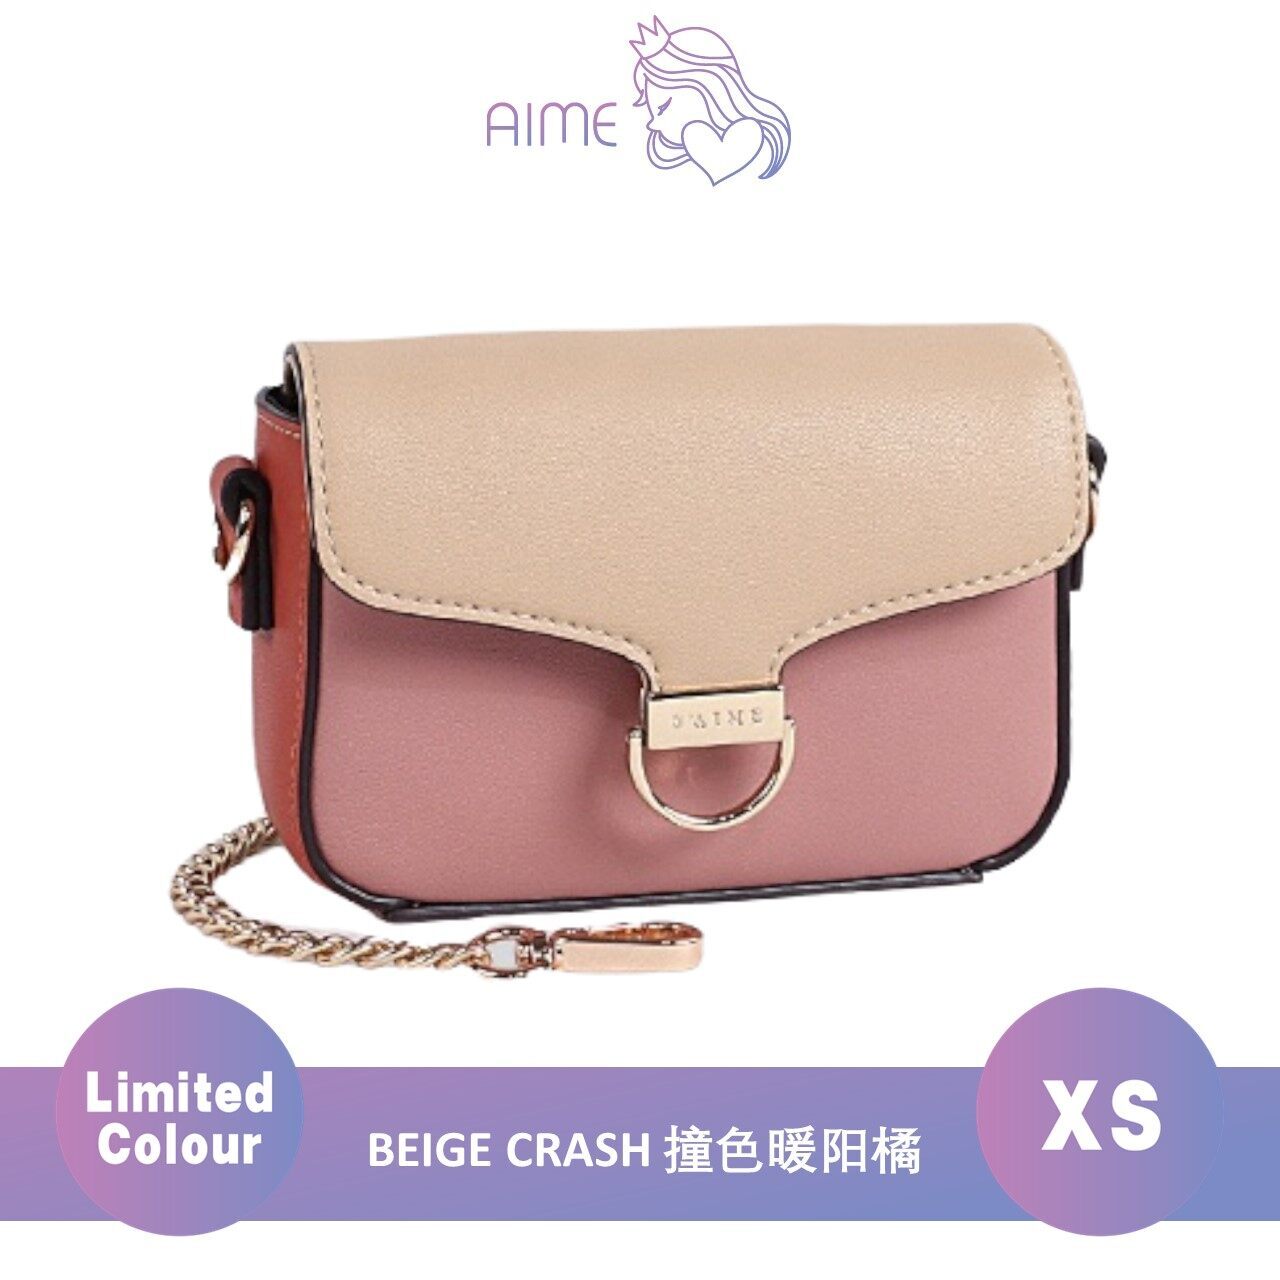 S'AIME | Authentic Leather Mini COCO Oblong Bag 真皮小COCO链条手提小方包 (XS)